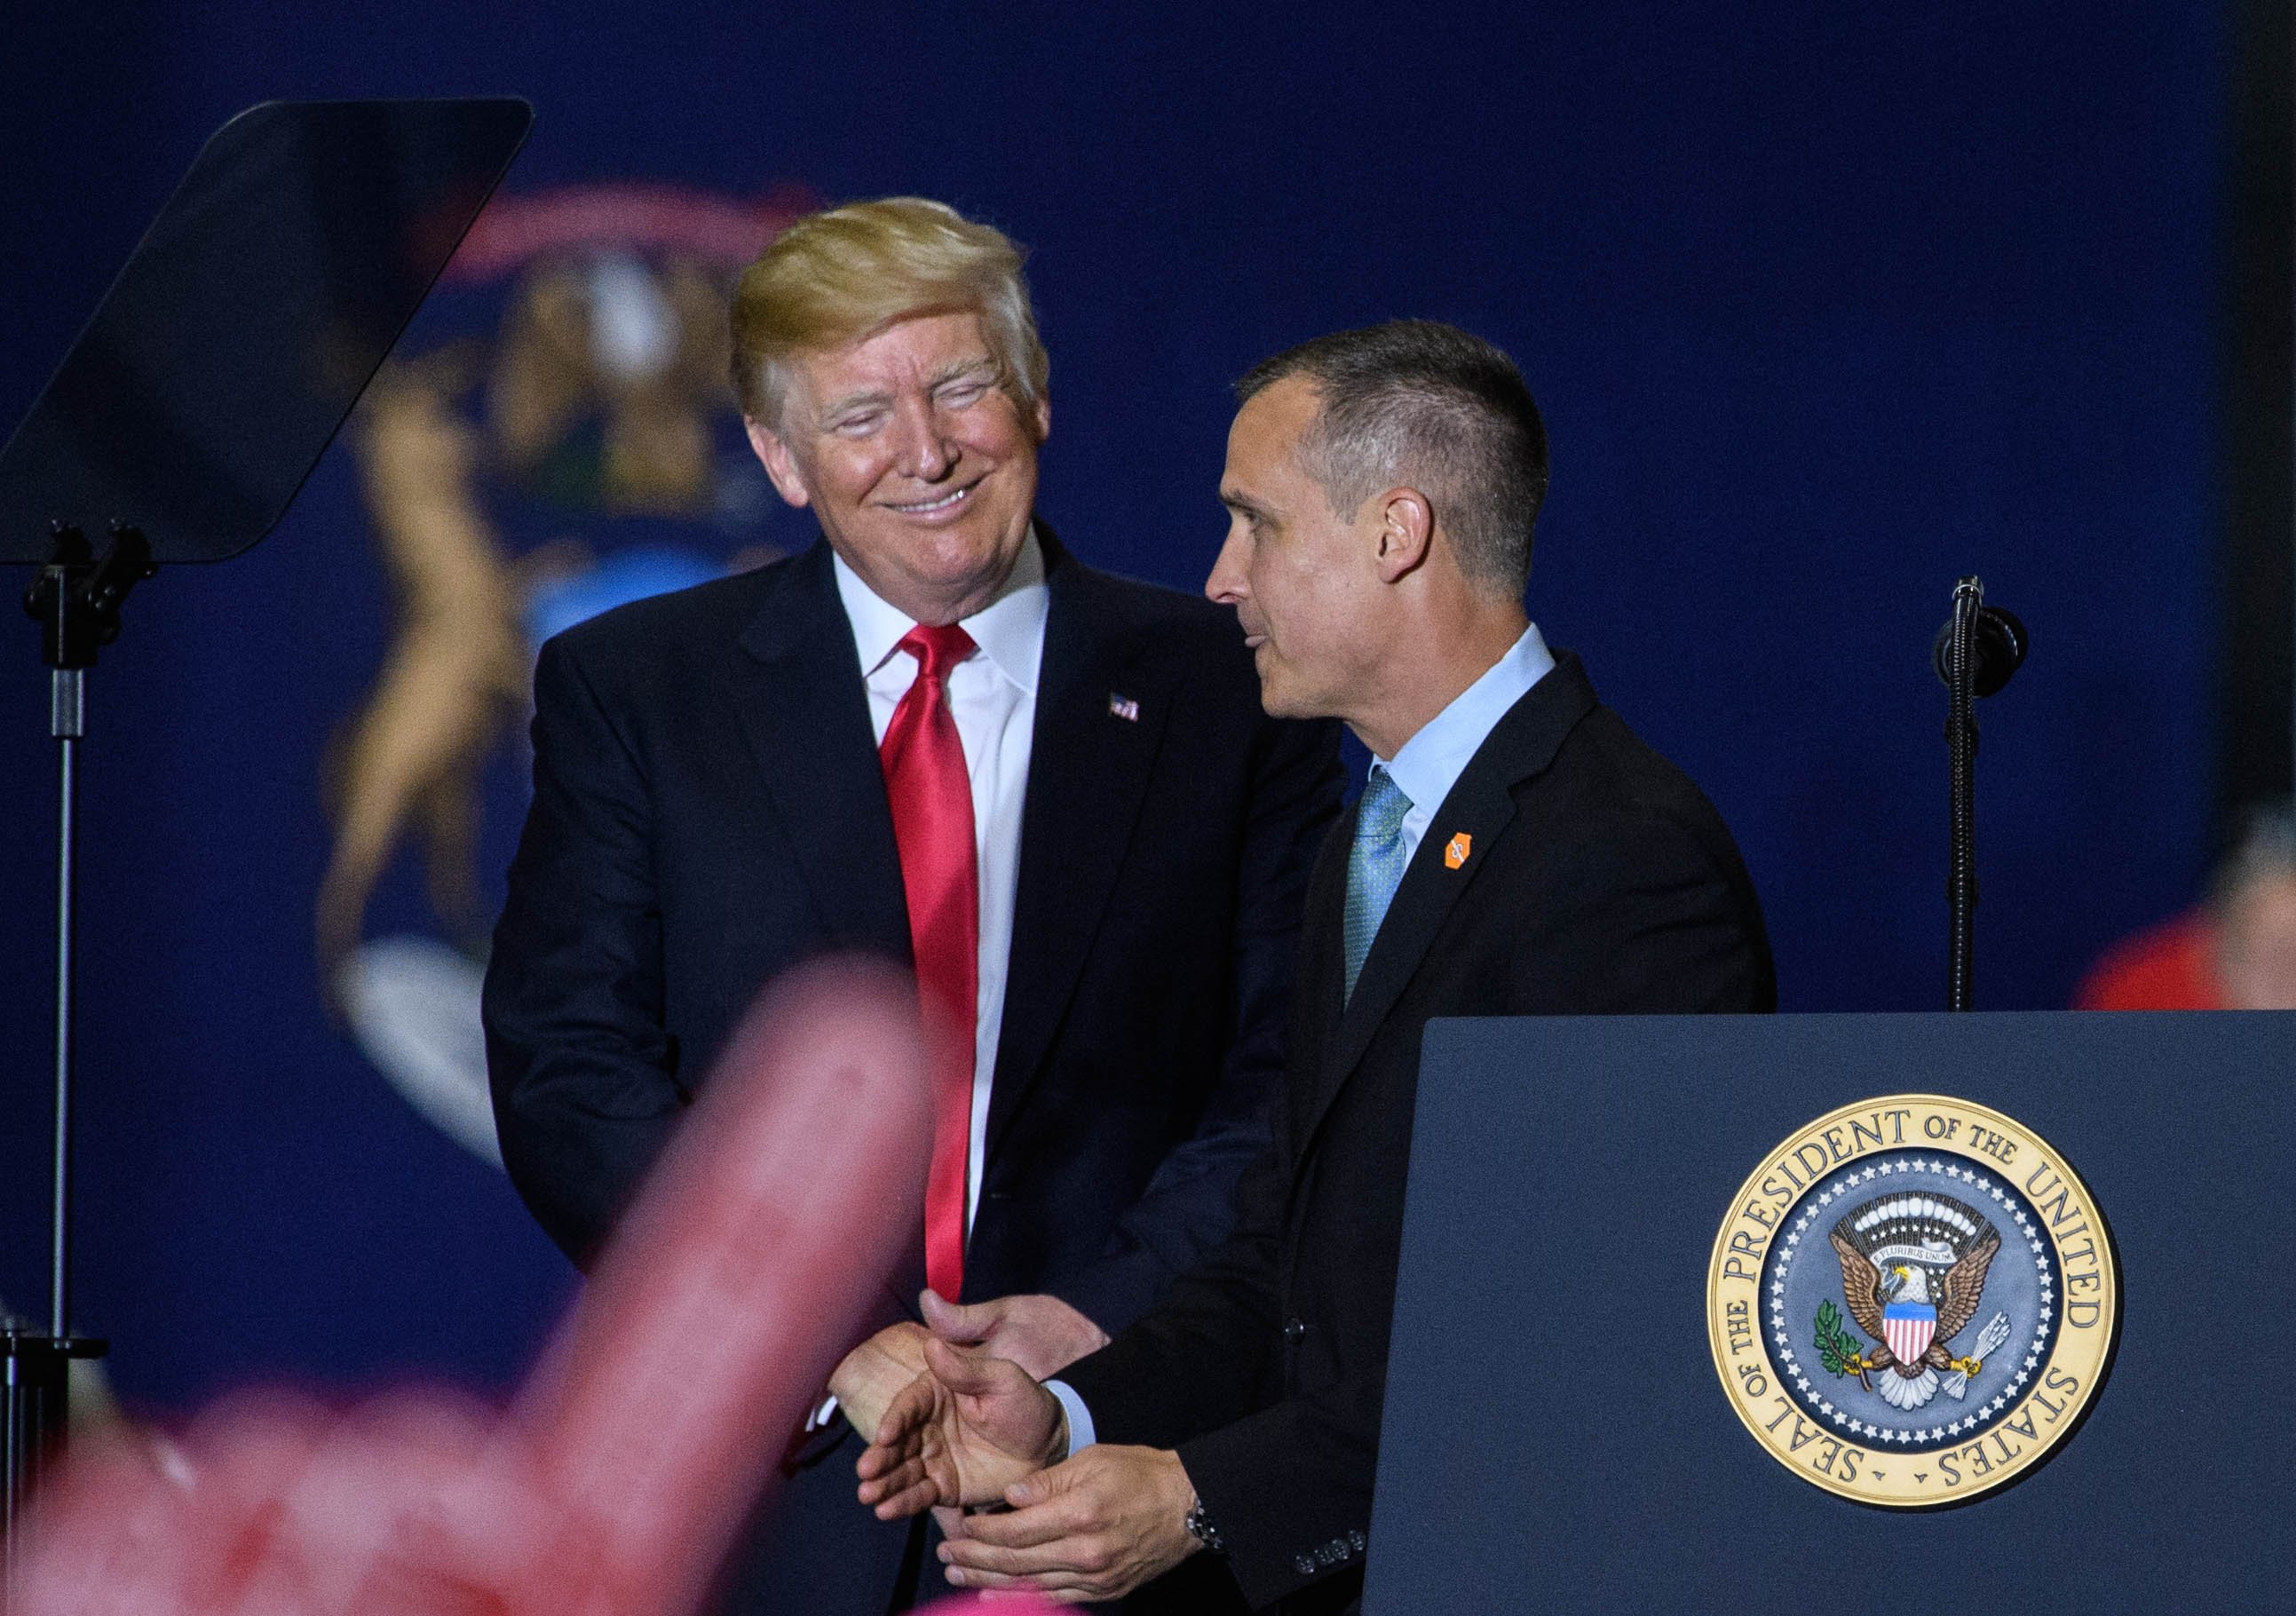 Former Trump Campaign manager Corey Lewandowski speaks as US President Donald Trump looks on during a rally at Total Sports Park in Washington, Michigan on April 28, 2018. (Photo by MANDEL NGAN / AFP) (Photo credit should read MANDEL NGAN/AFP/Getty Images)